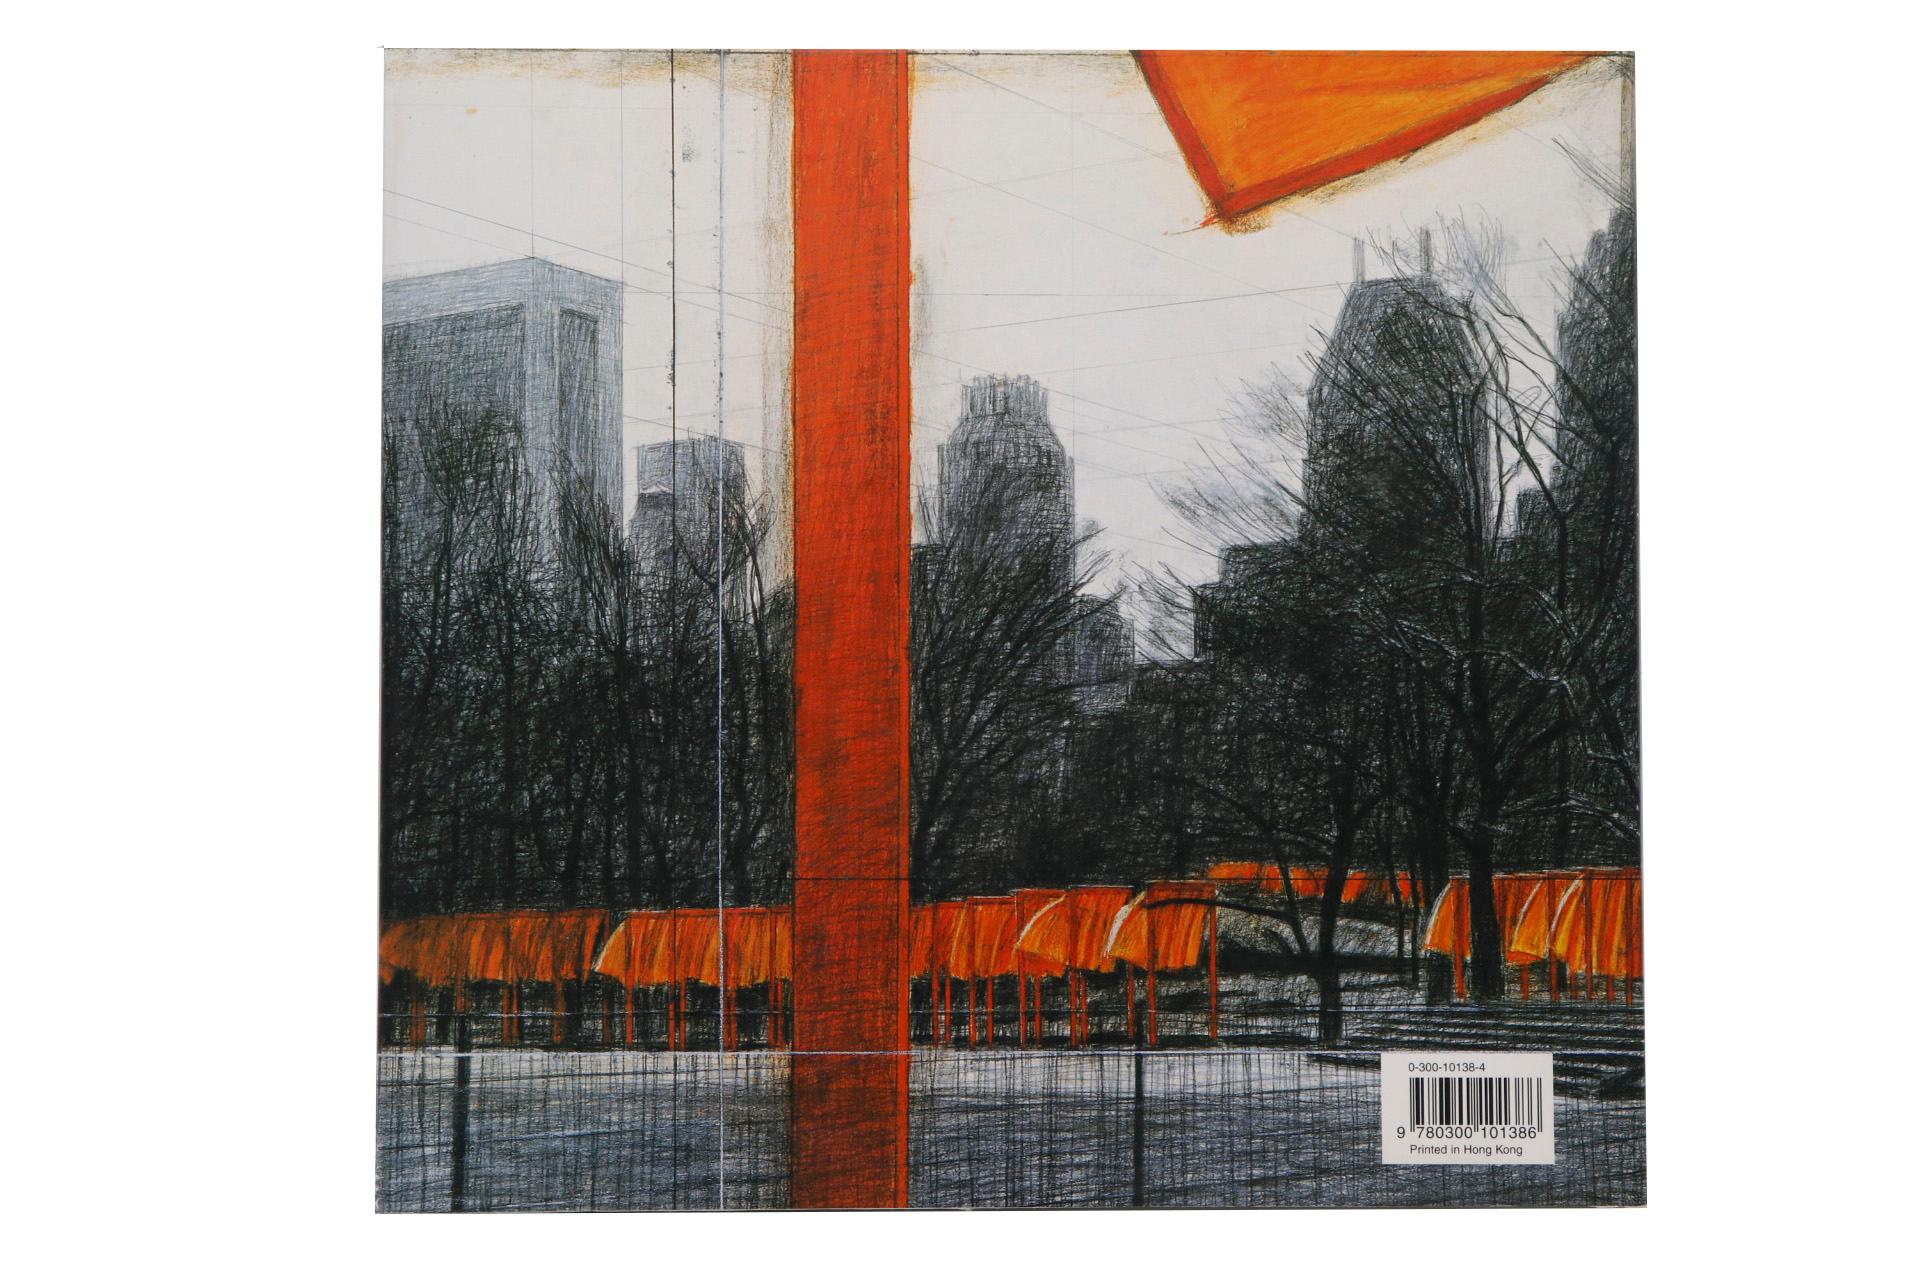 Christo and Jeanne-Claude, On the Way to the Gates, Central Park, New York City. Book by Jonathan Fineberg with photographs by Wolfgang Volz. Published in conjunction with a major exhibition at the Metropolitan Museum of Art which opened in April